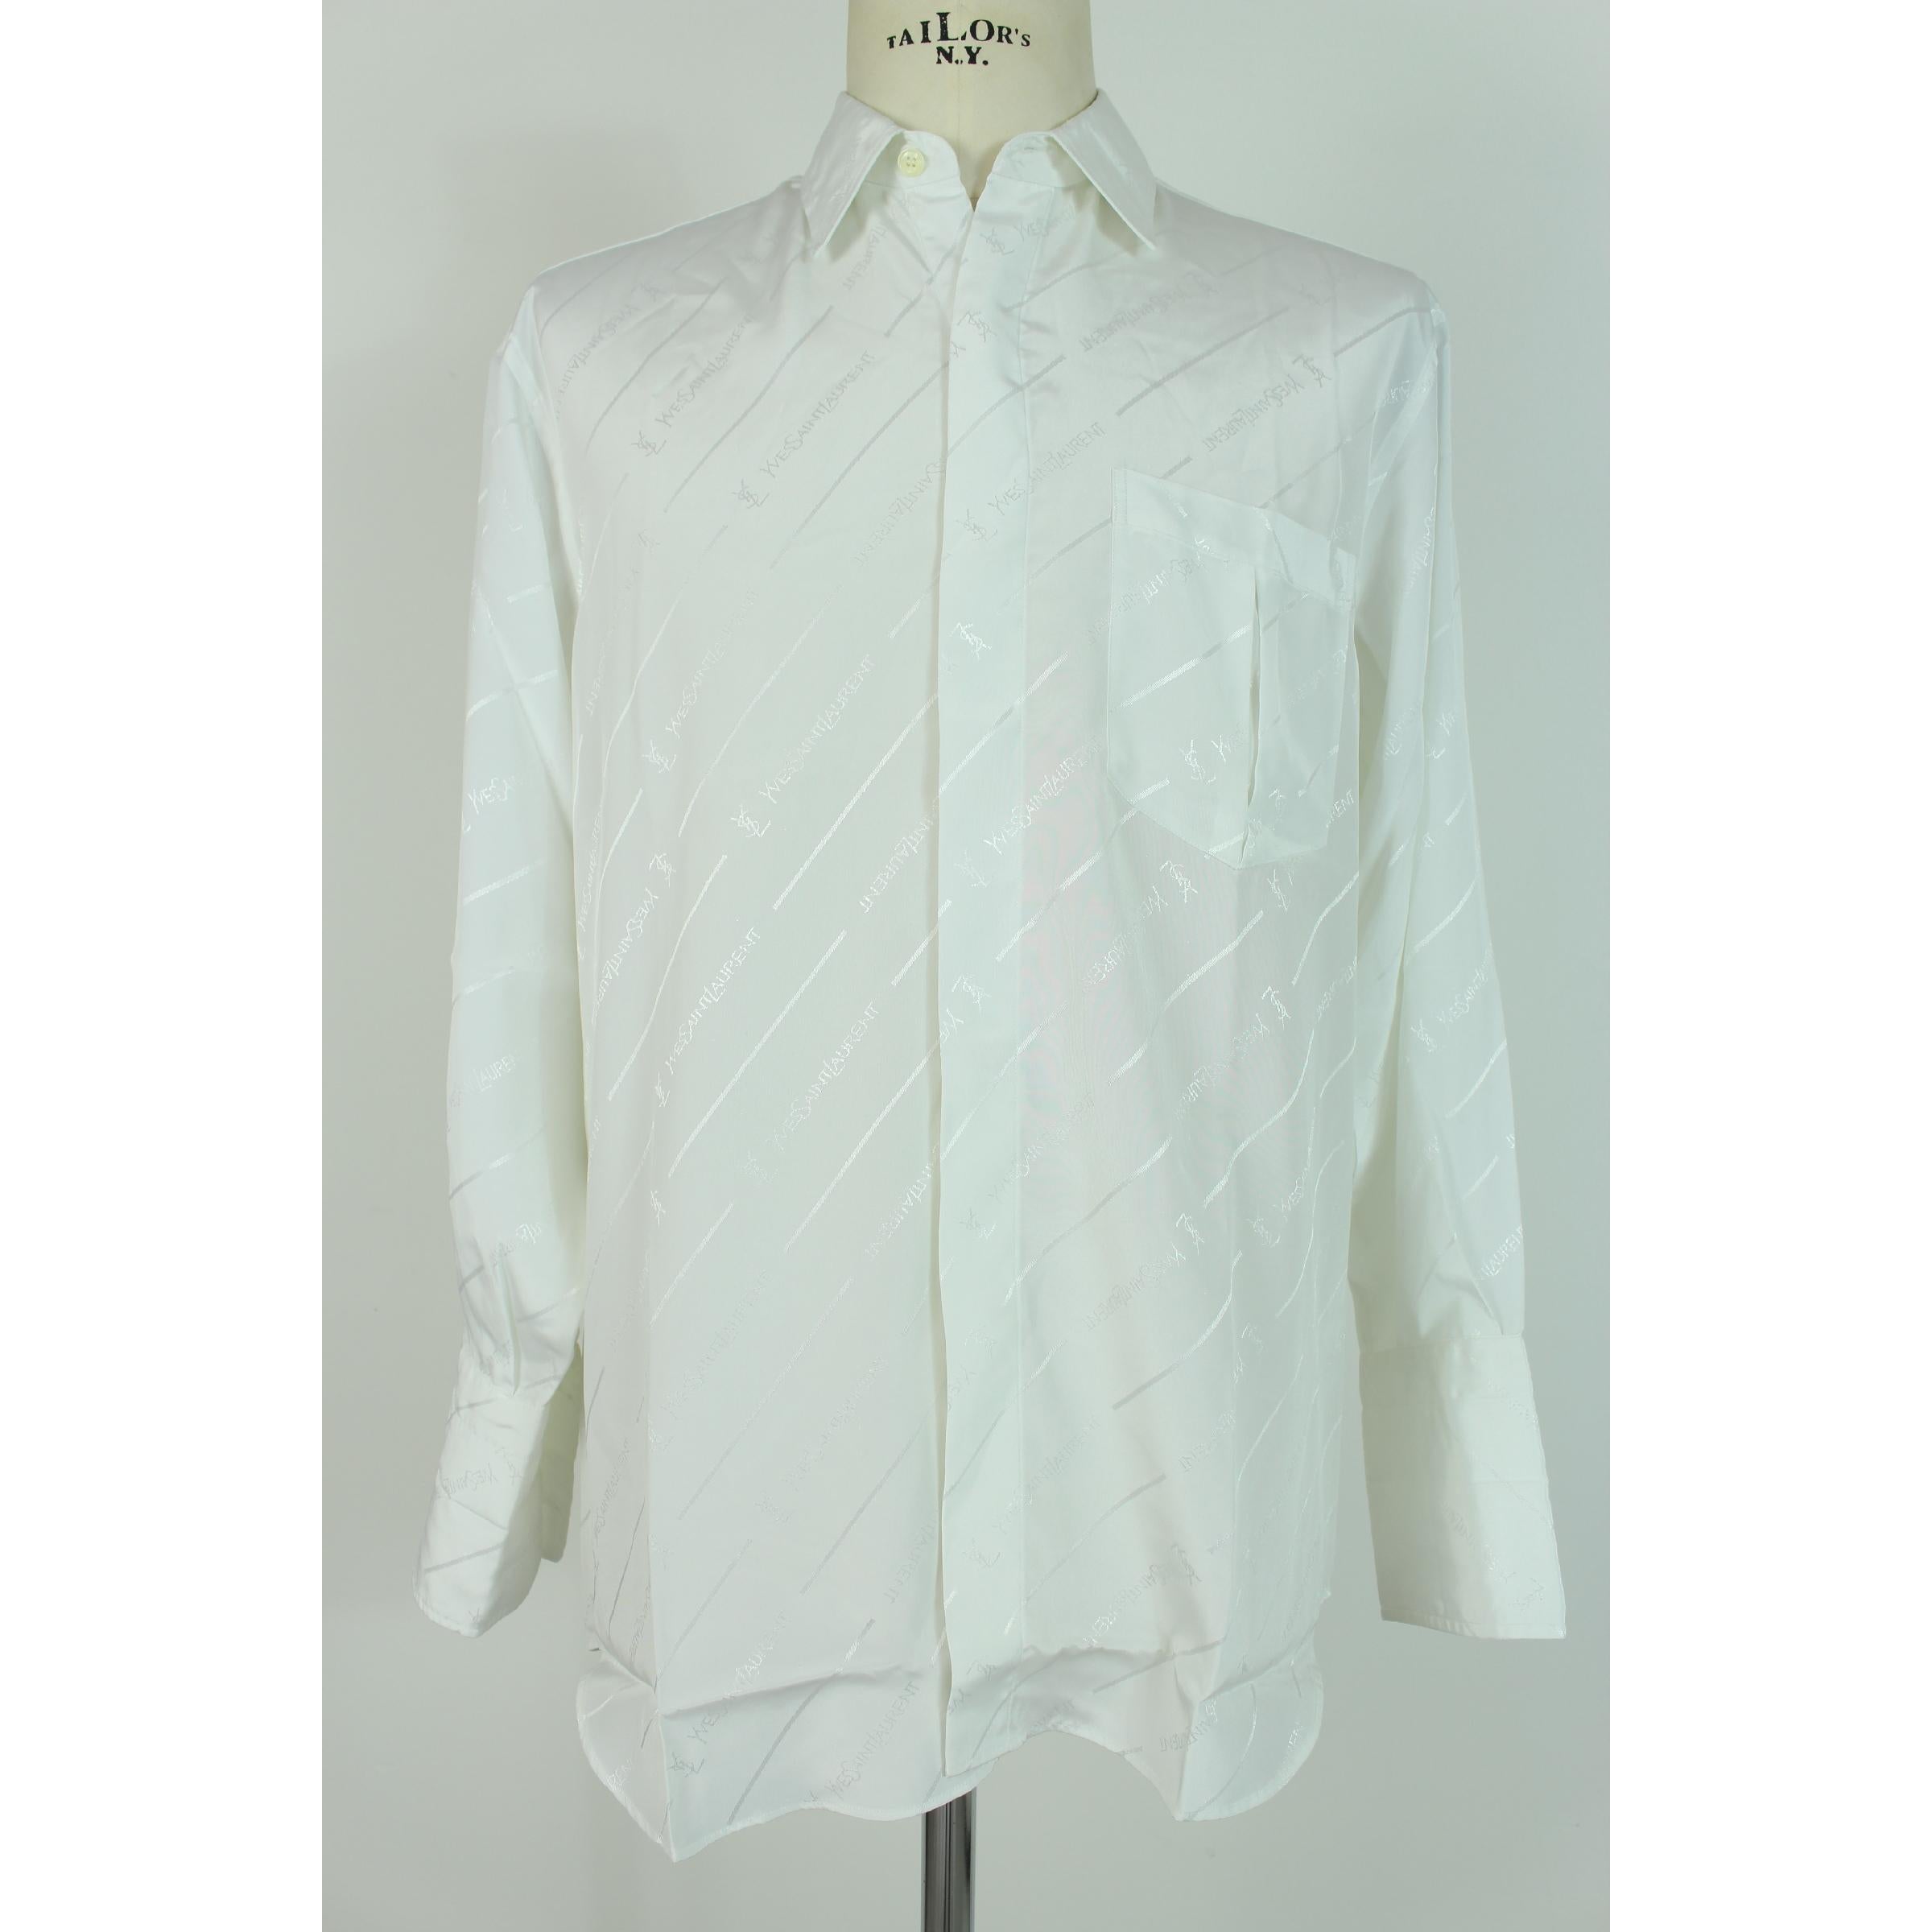 Yves Saint Laurent vintage men's shirt, white, 100% silk, cuffs with twin closure. Missing label. 1990s. Made in Italy. Excellent vintage conditions.

Size: 48 It 38 Us 38 Uk

Shoulder: 48 cm
Bust / Chest: 58 cm
Sleeve: 62 cm
Length: 80 cm